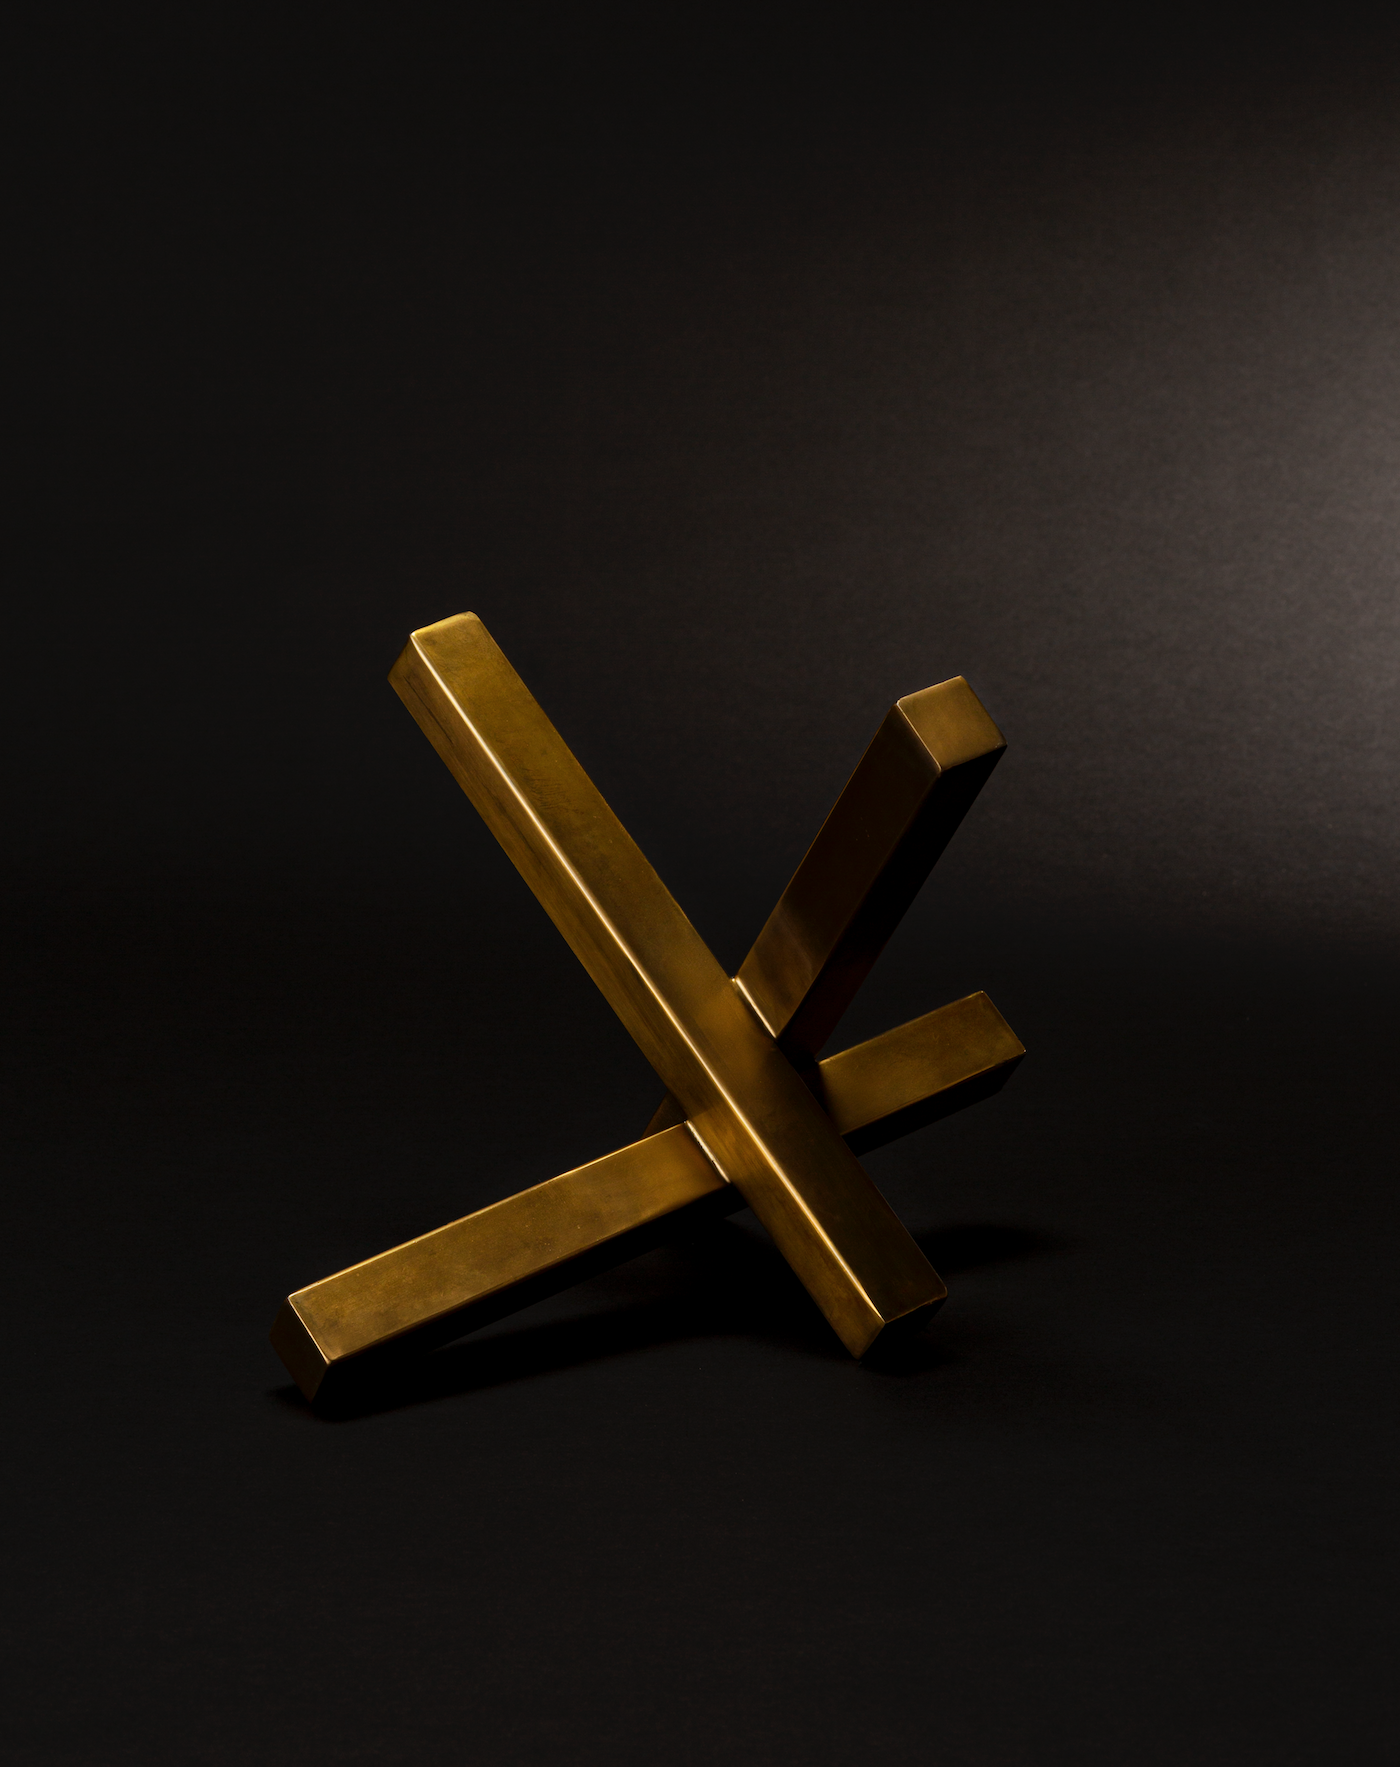 Intersecting natural brass sculpture on a black background